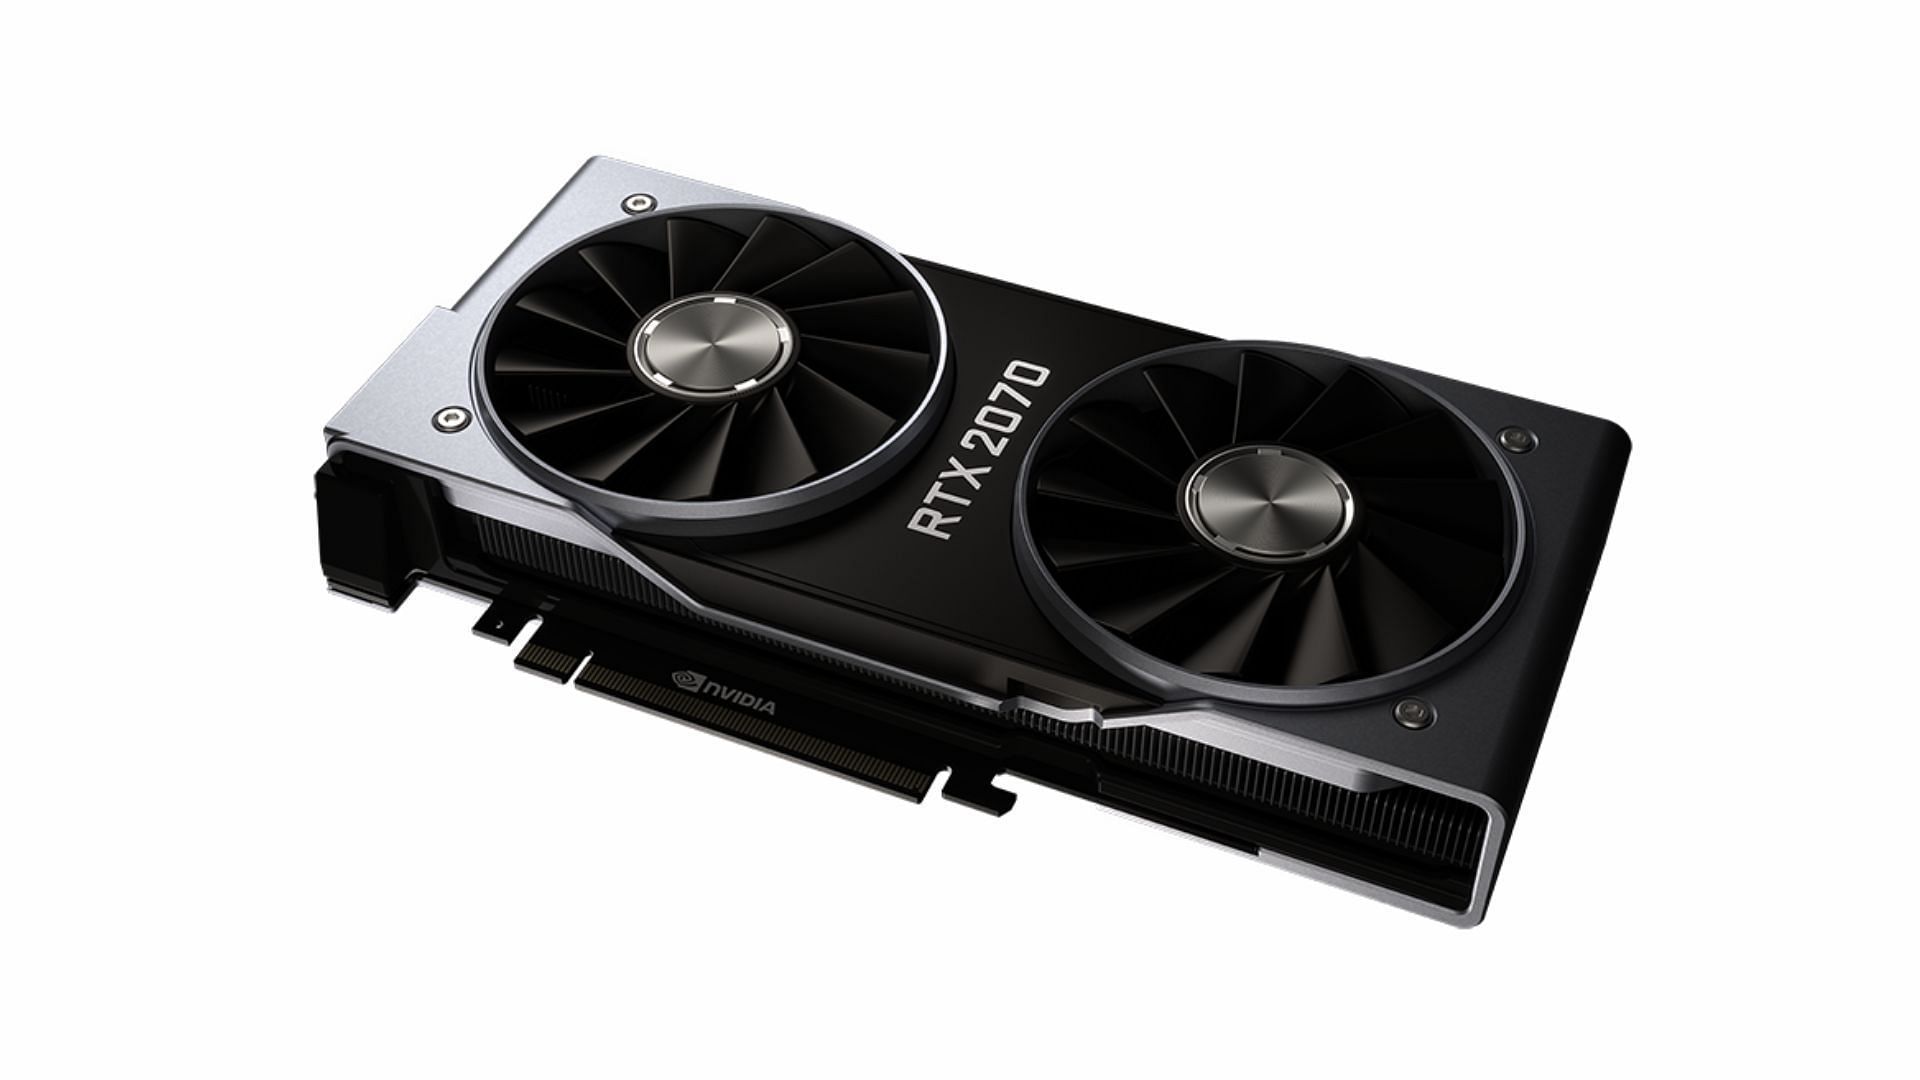 RTX 2070 offers 8GB VRAM and 2304 CUDA cores with ray tracing capabilities (Image via Nvidia)